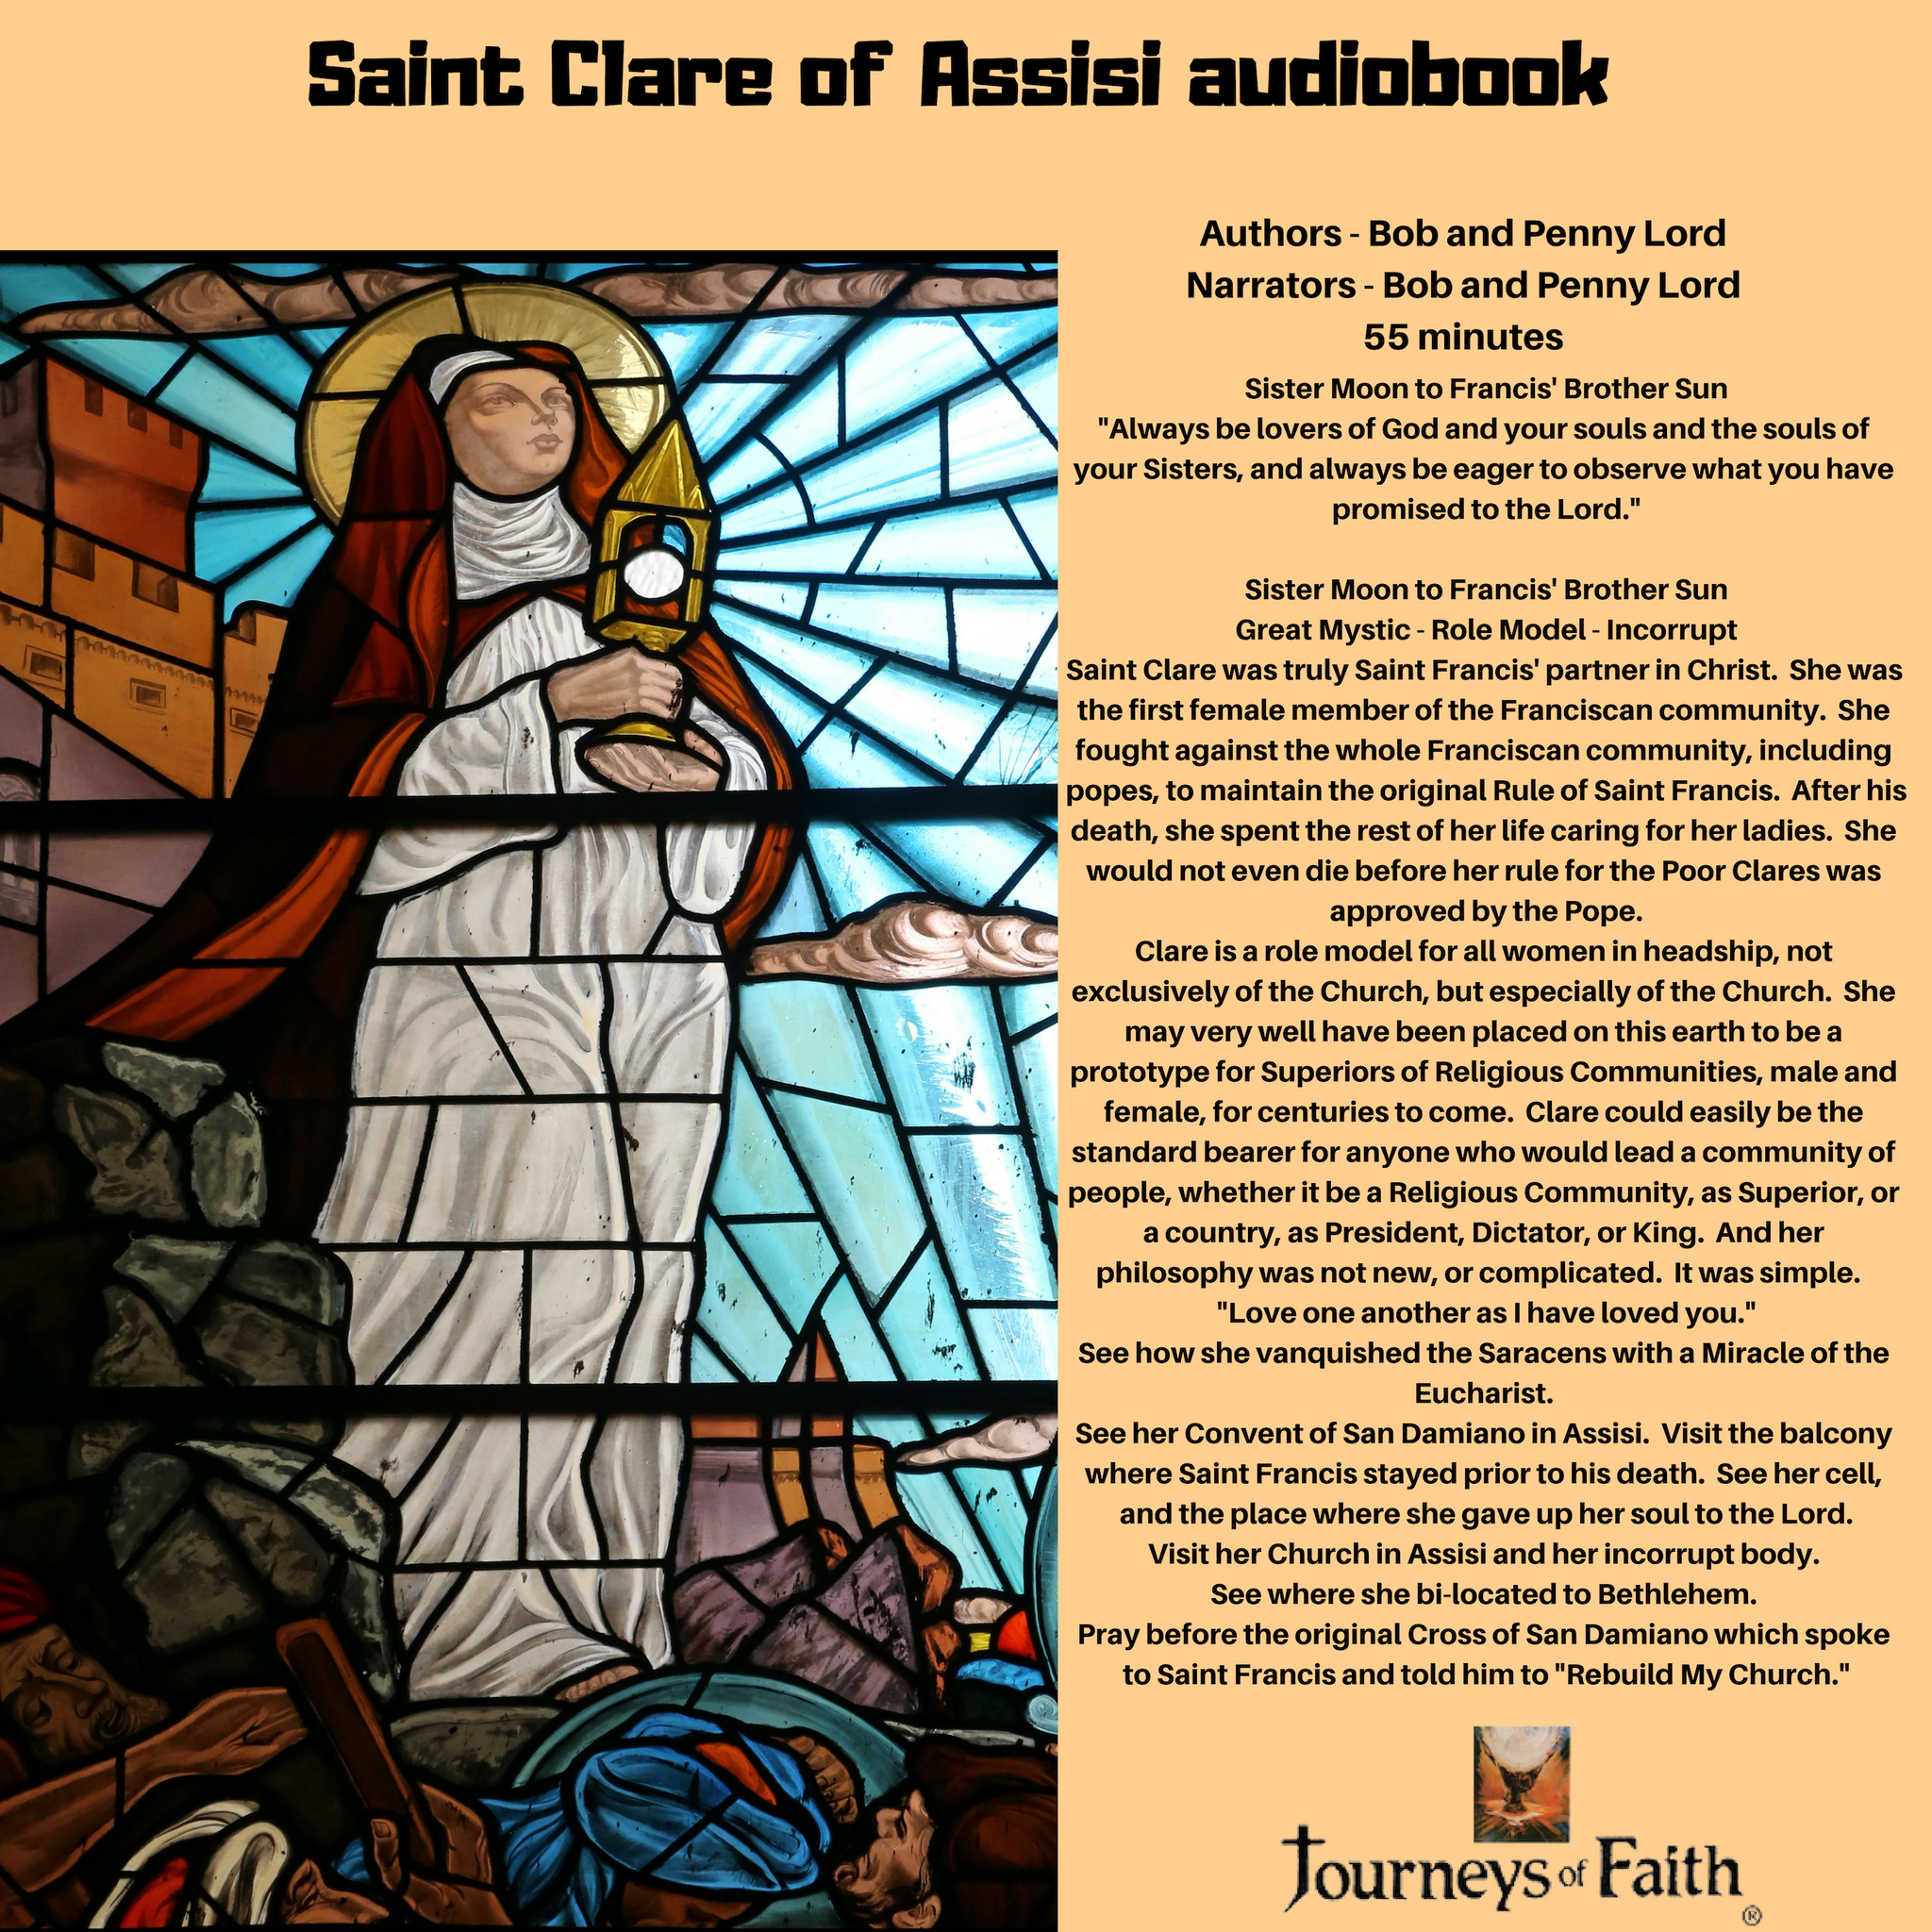 Saint Clare of Assisi Audiobook - Bob and Penny Lord